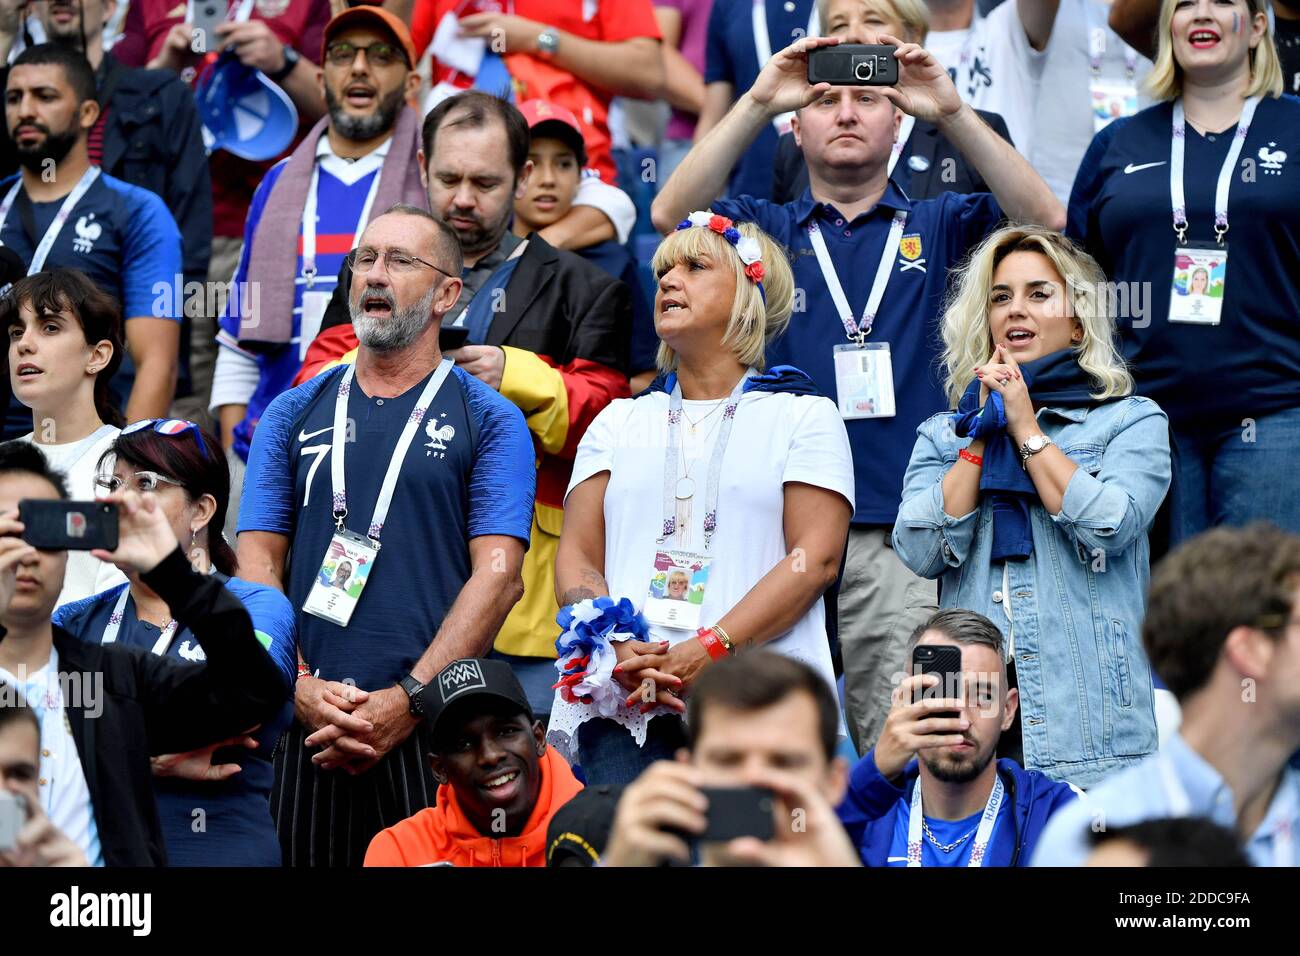 Alain Griezmann, Isabelle Griezmann, Maud Griezmann and Erika Choperena  attend the World Cup round of 8 game between France and Uruguay on July 6,  2018 in Nizhny Novgorod, Russia. Photo by Lionel